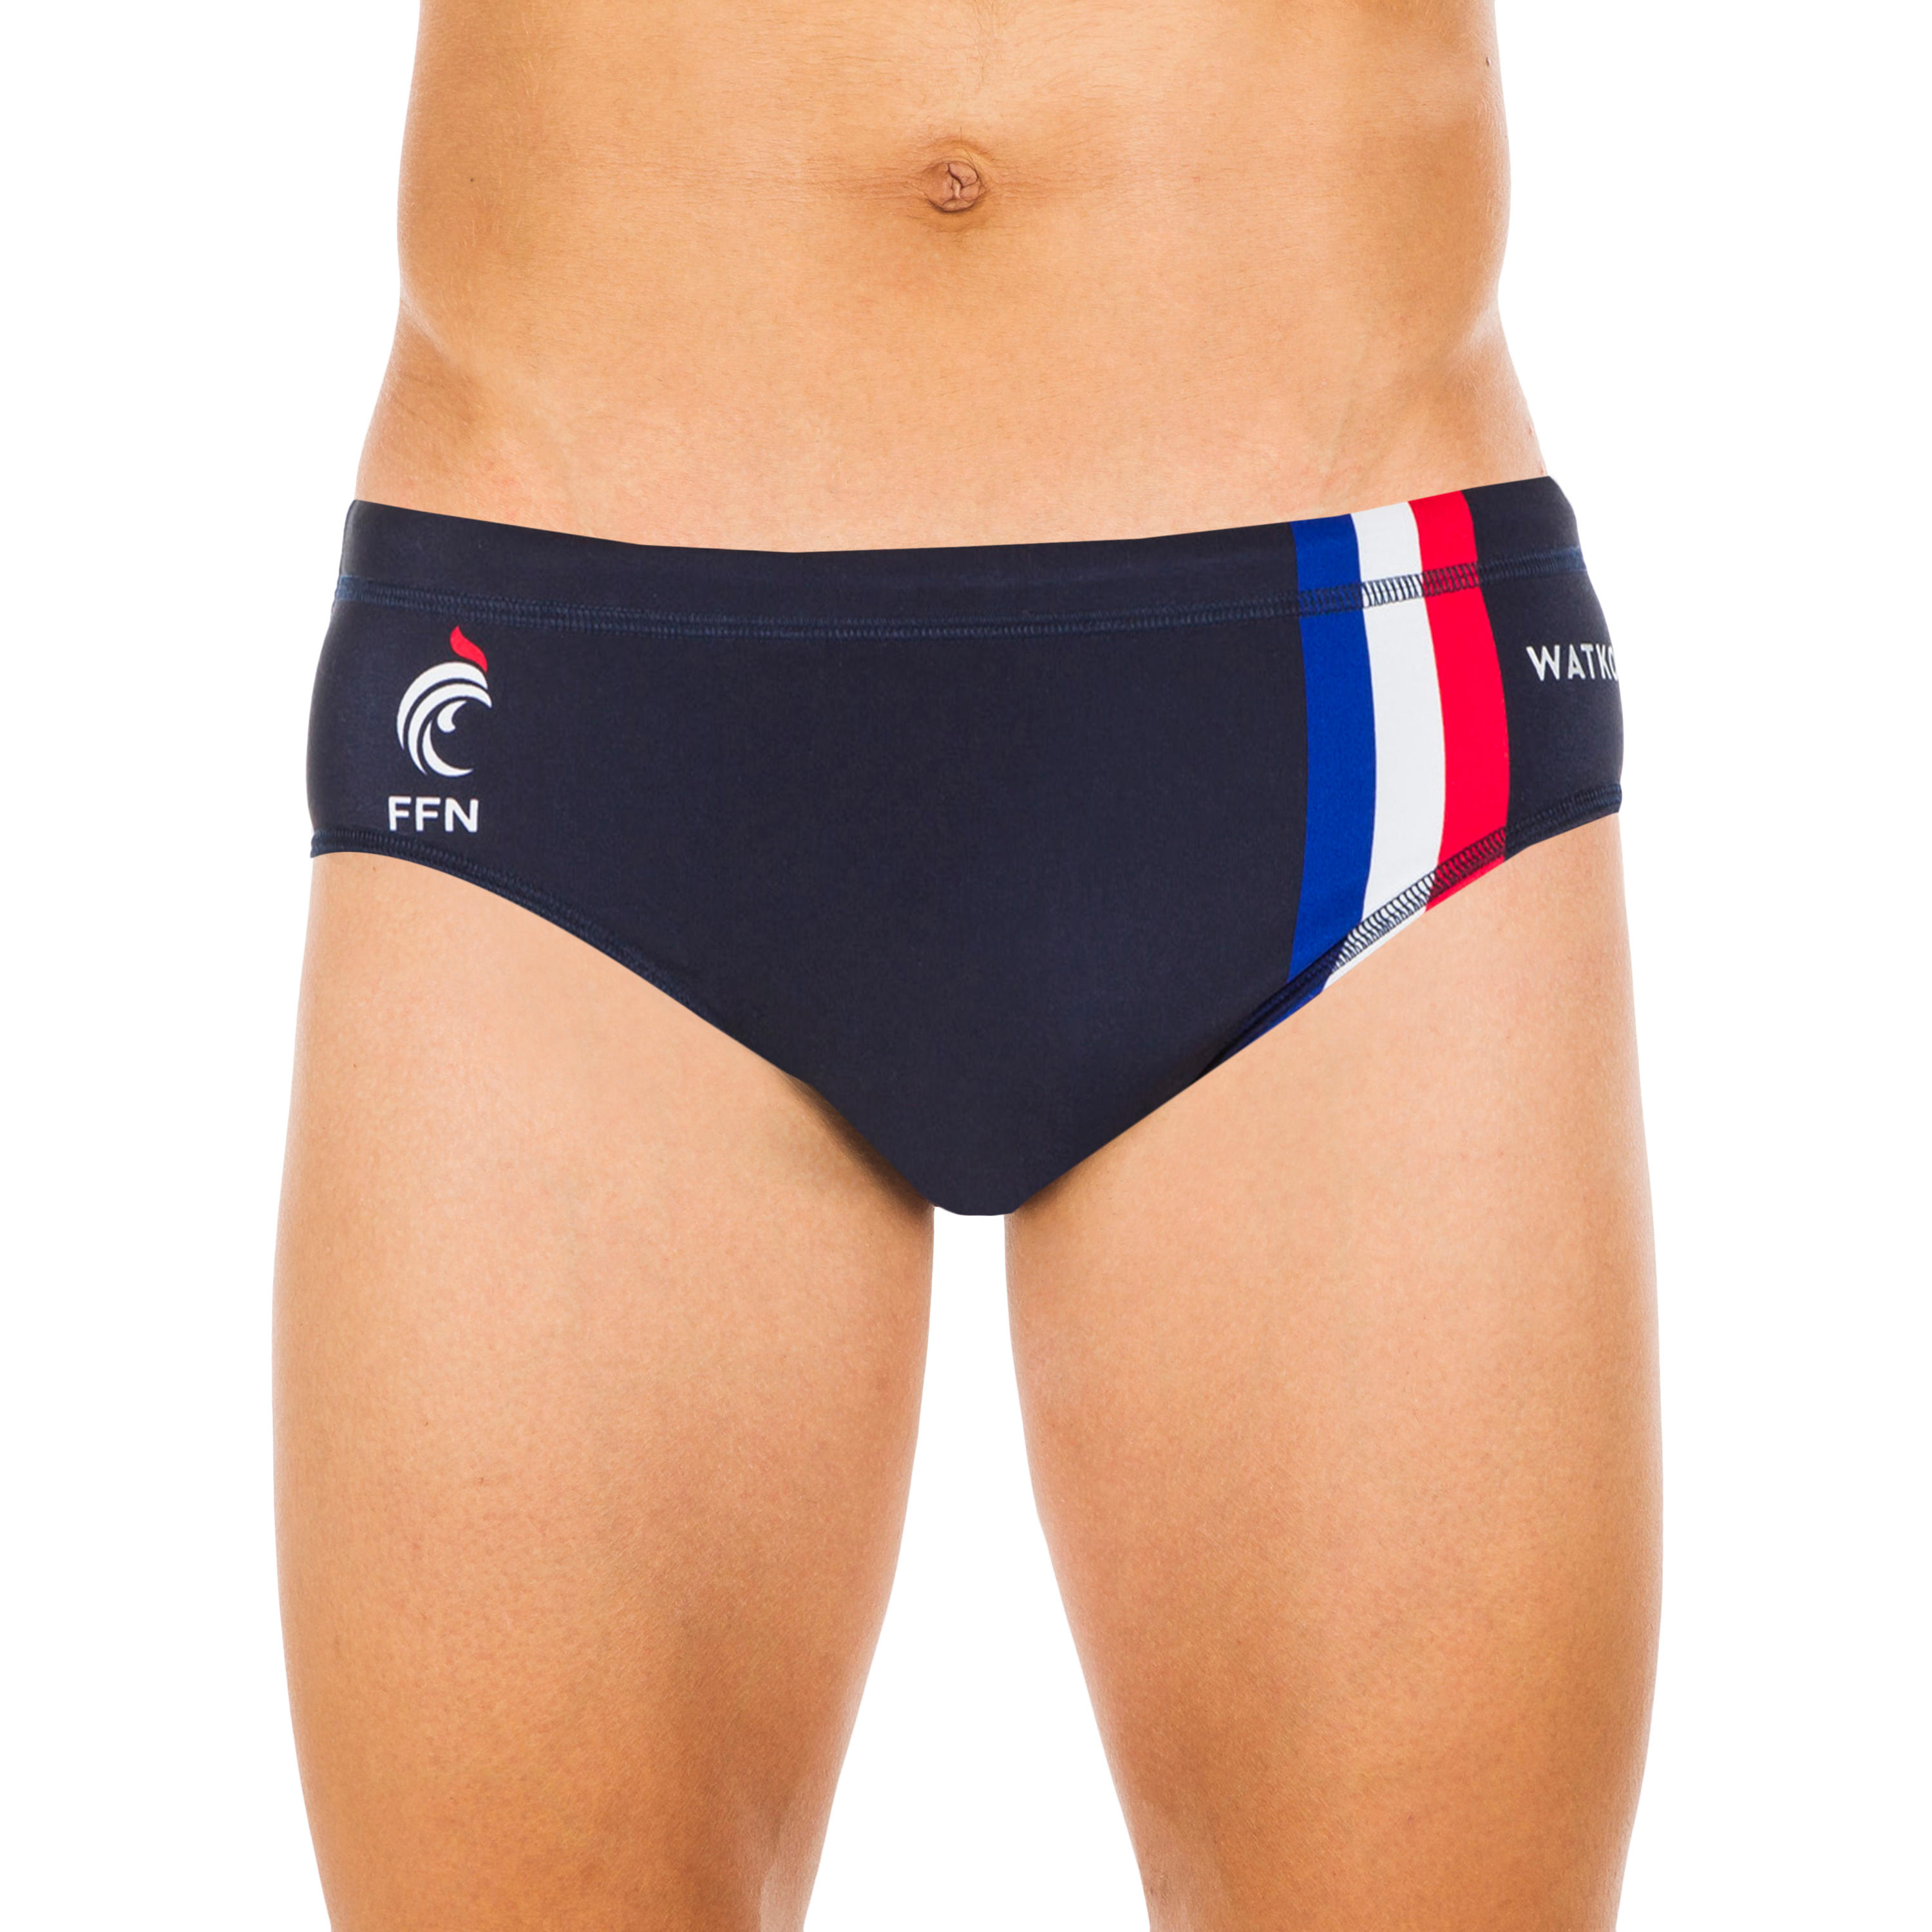 Men's Water Polo Swimming Briefs - Official France